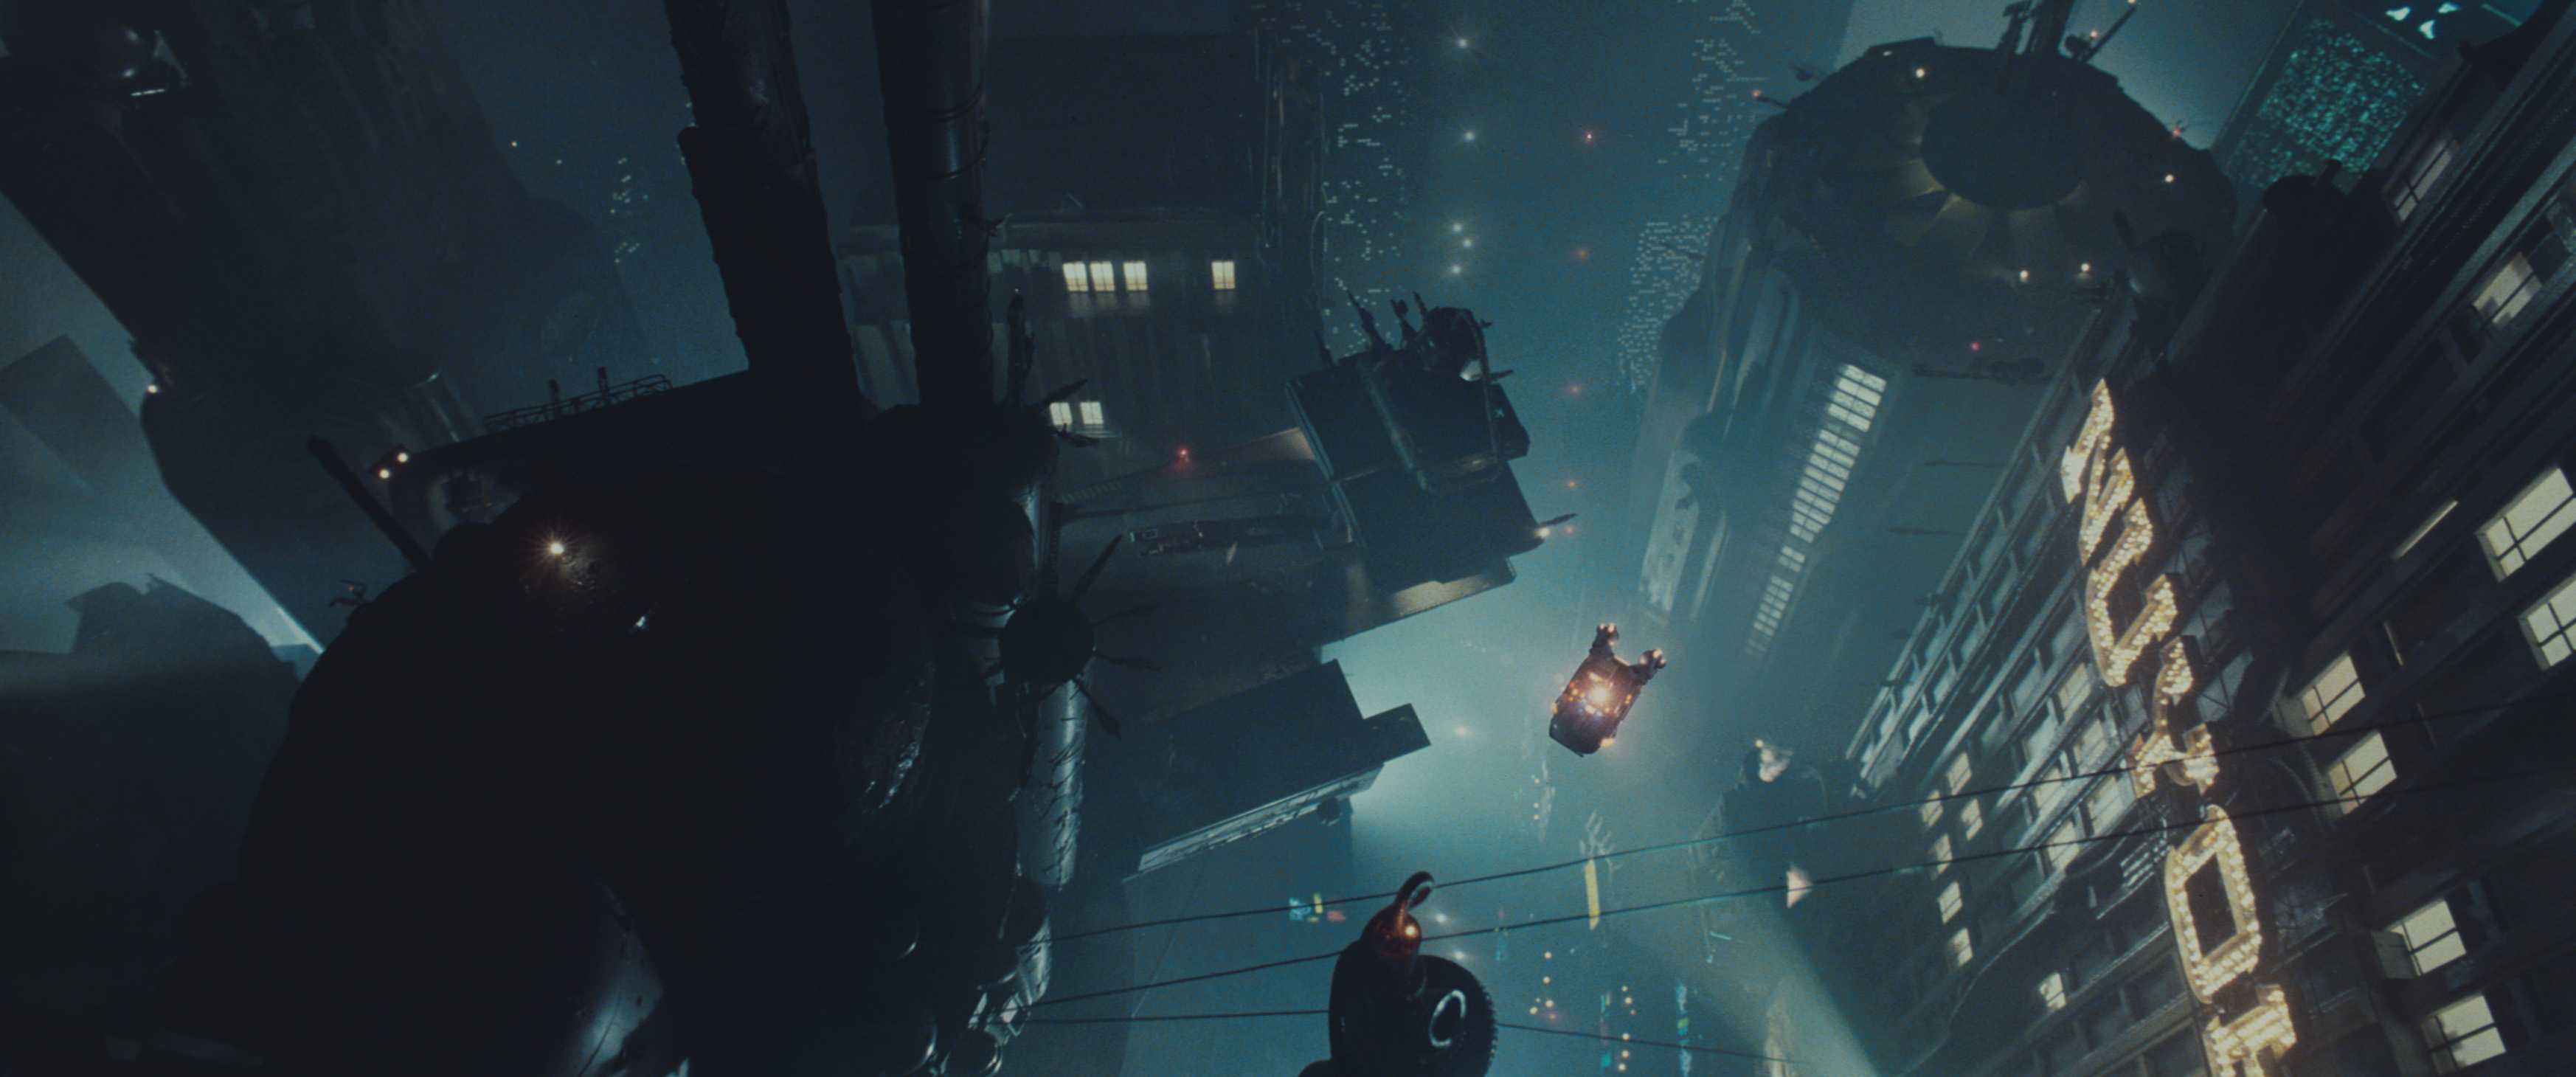 A scene from Warner Bros. Pictures Blade Runner: The Final Cut. PHOTOGRAPHS TO BE USED SOLELY FOR ADVERTISING, PROMOTION, PUBLICITY OR REVIEWS OF THIS SPECIFIC MOTION PICTURE AND TO REMAIN THE PROPERTY OF THE STUDIO. NOT FOR SALE OR REDISTRIBUTION.